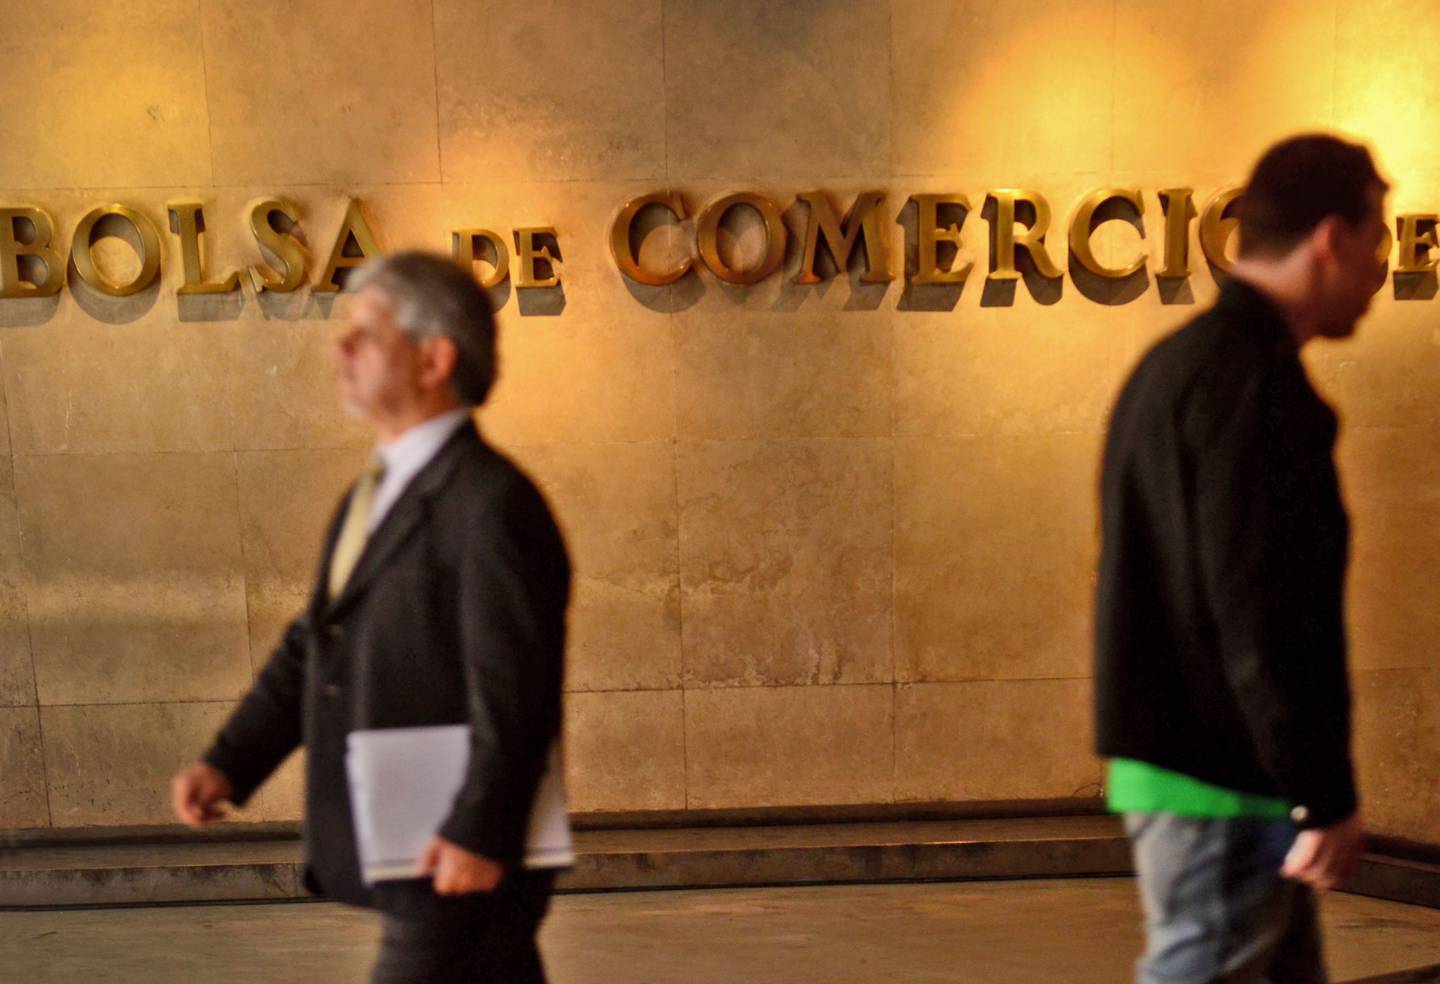 People pass in front of the entrance sign to the Buenos Aires Stock Exchange in Buenos Aires, Argentina, on Tuesday, Oct. 18, 2011. Photographer: Diego Giudice/Bloomberg